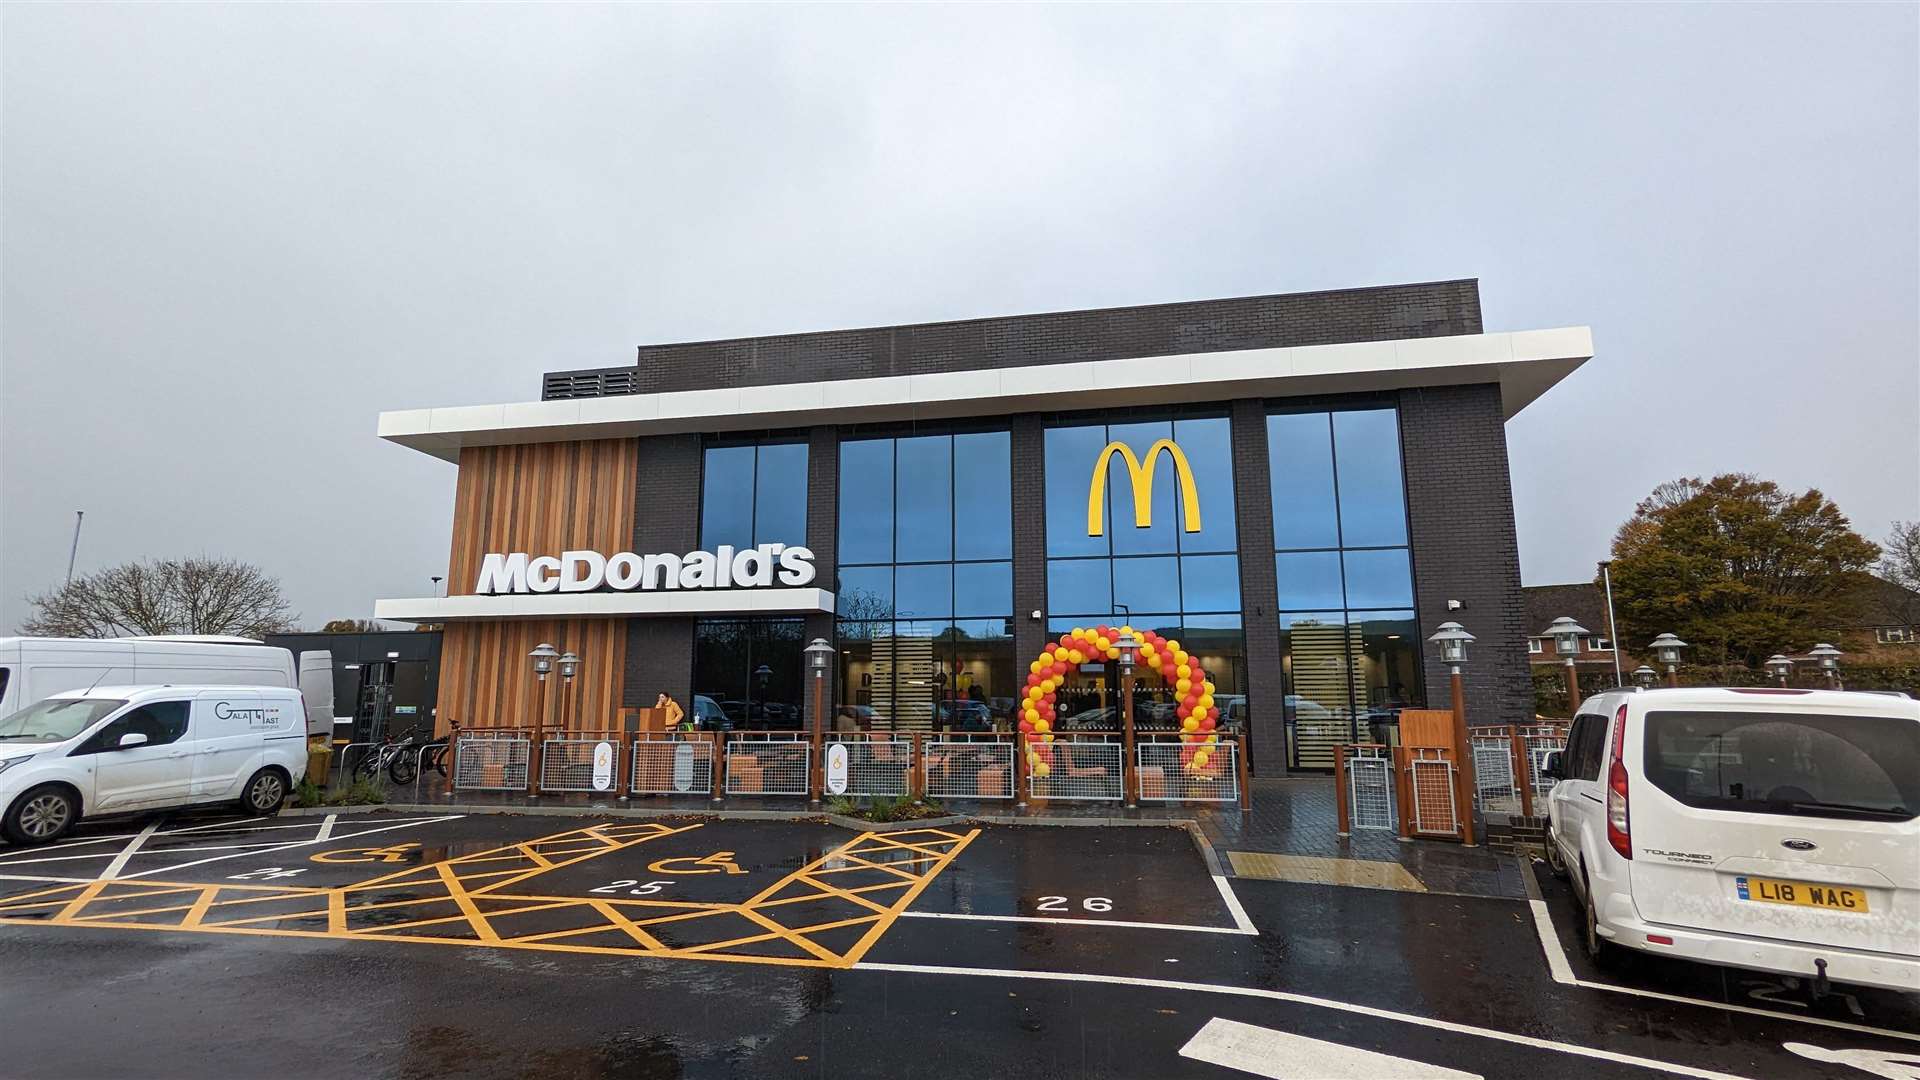 The two-storey McDonald's in Folkestone - where the kitchen is upstairs